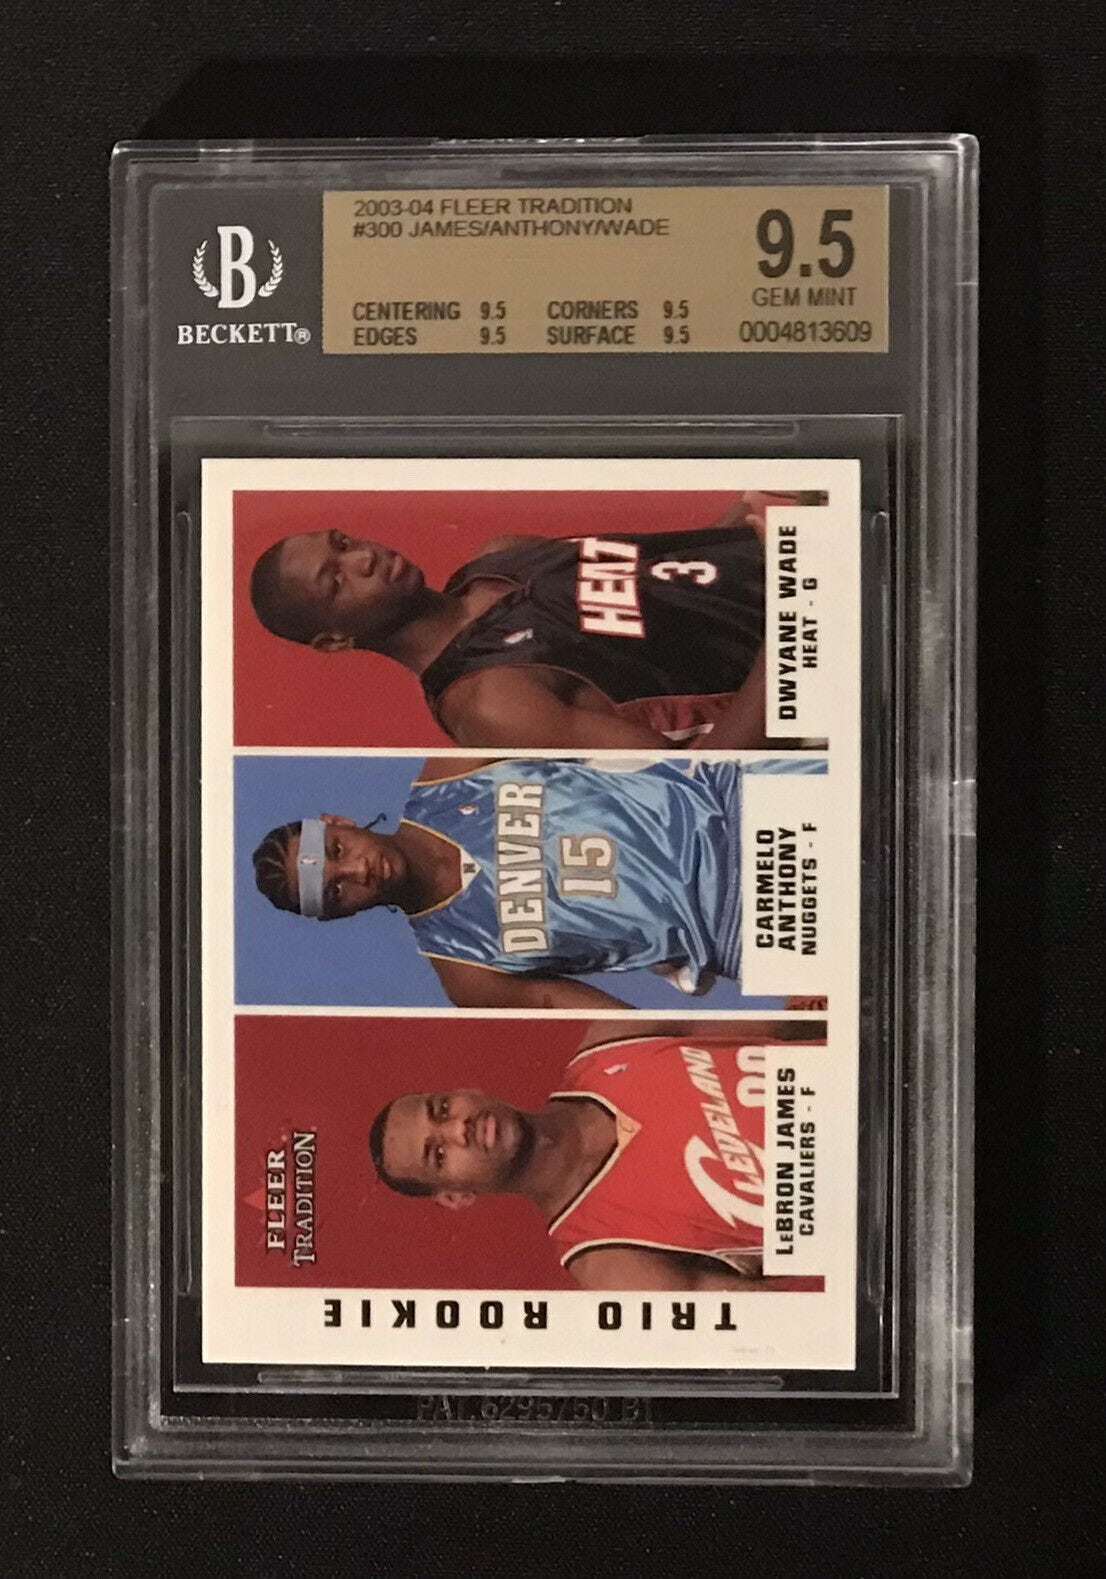 Image 1 - 2003-04 FLEER TRADITION TRIO ROOKIE JAMES/ANTHONY/WADE RC#300 BGS 9.5 GEM MINT